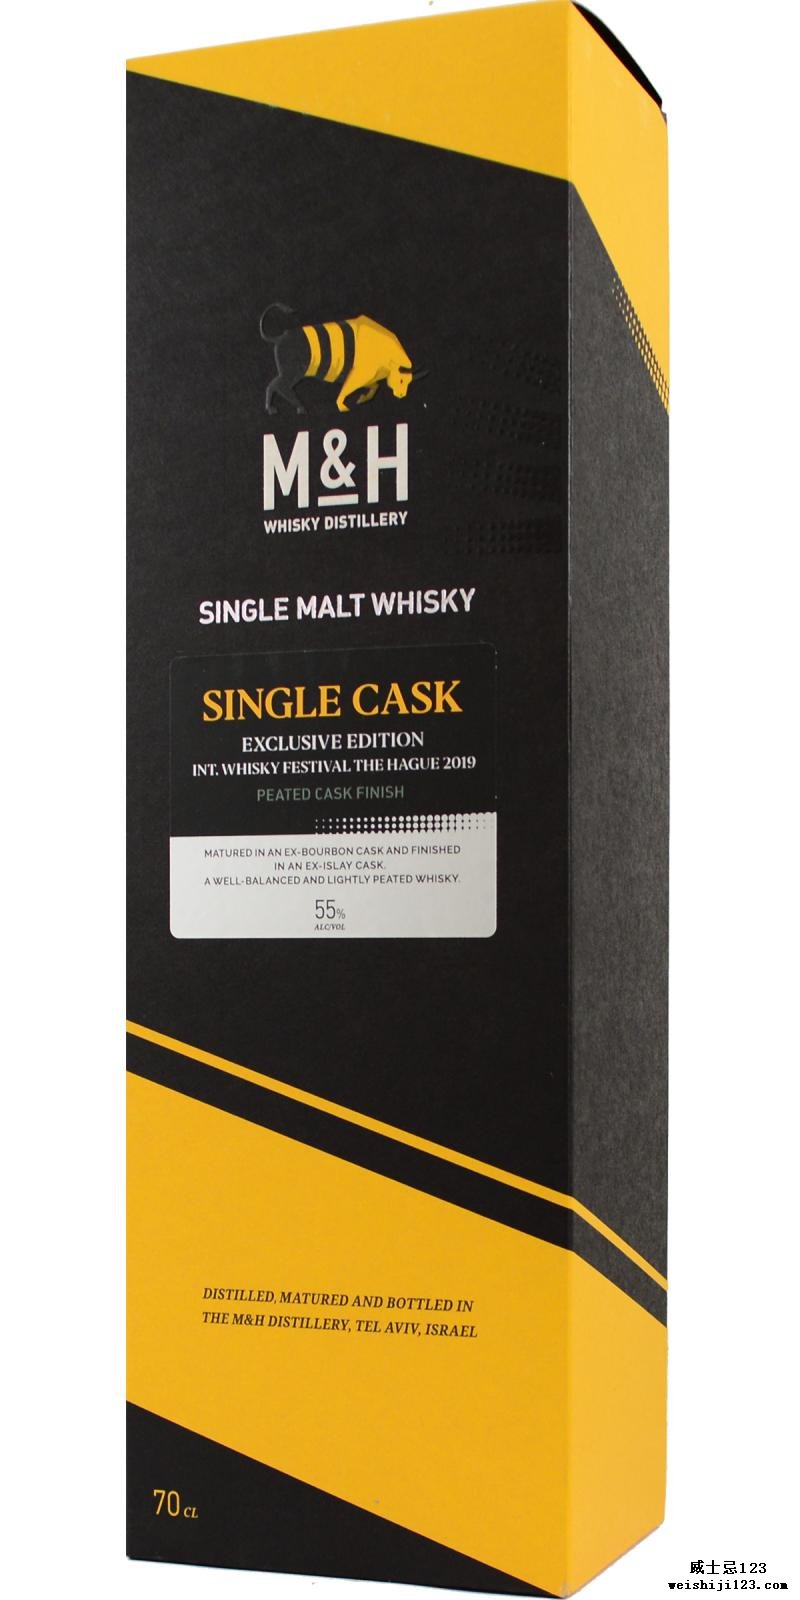 M&H Int. Whisky Festival The Hague 2019